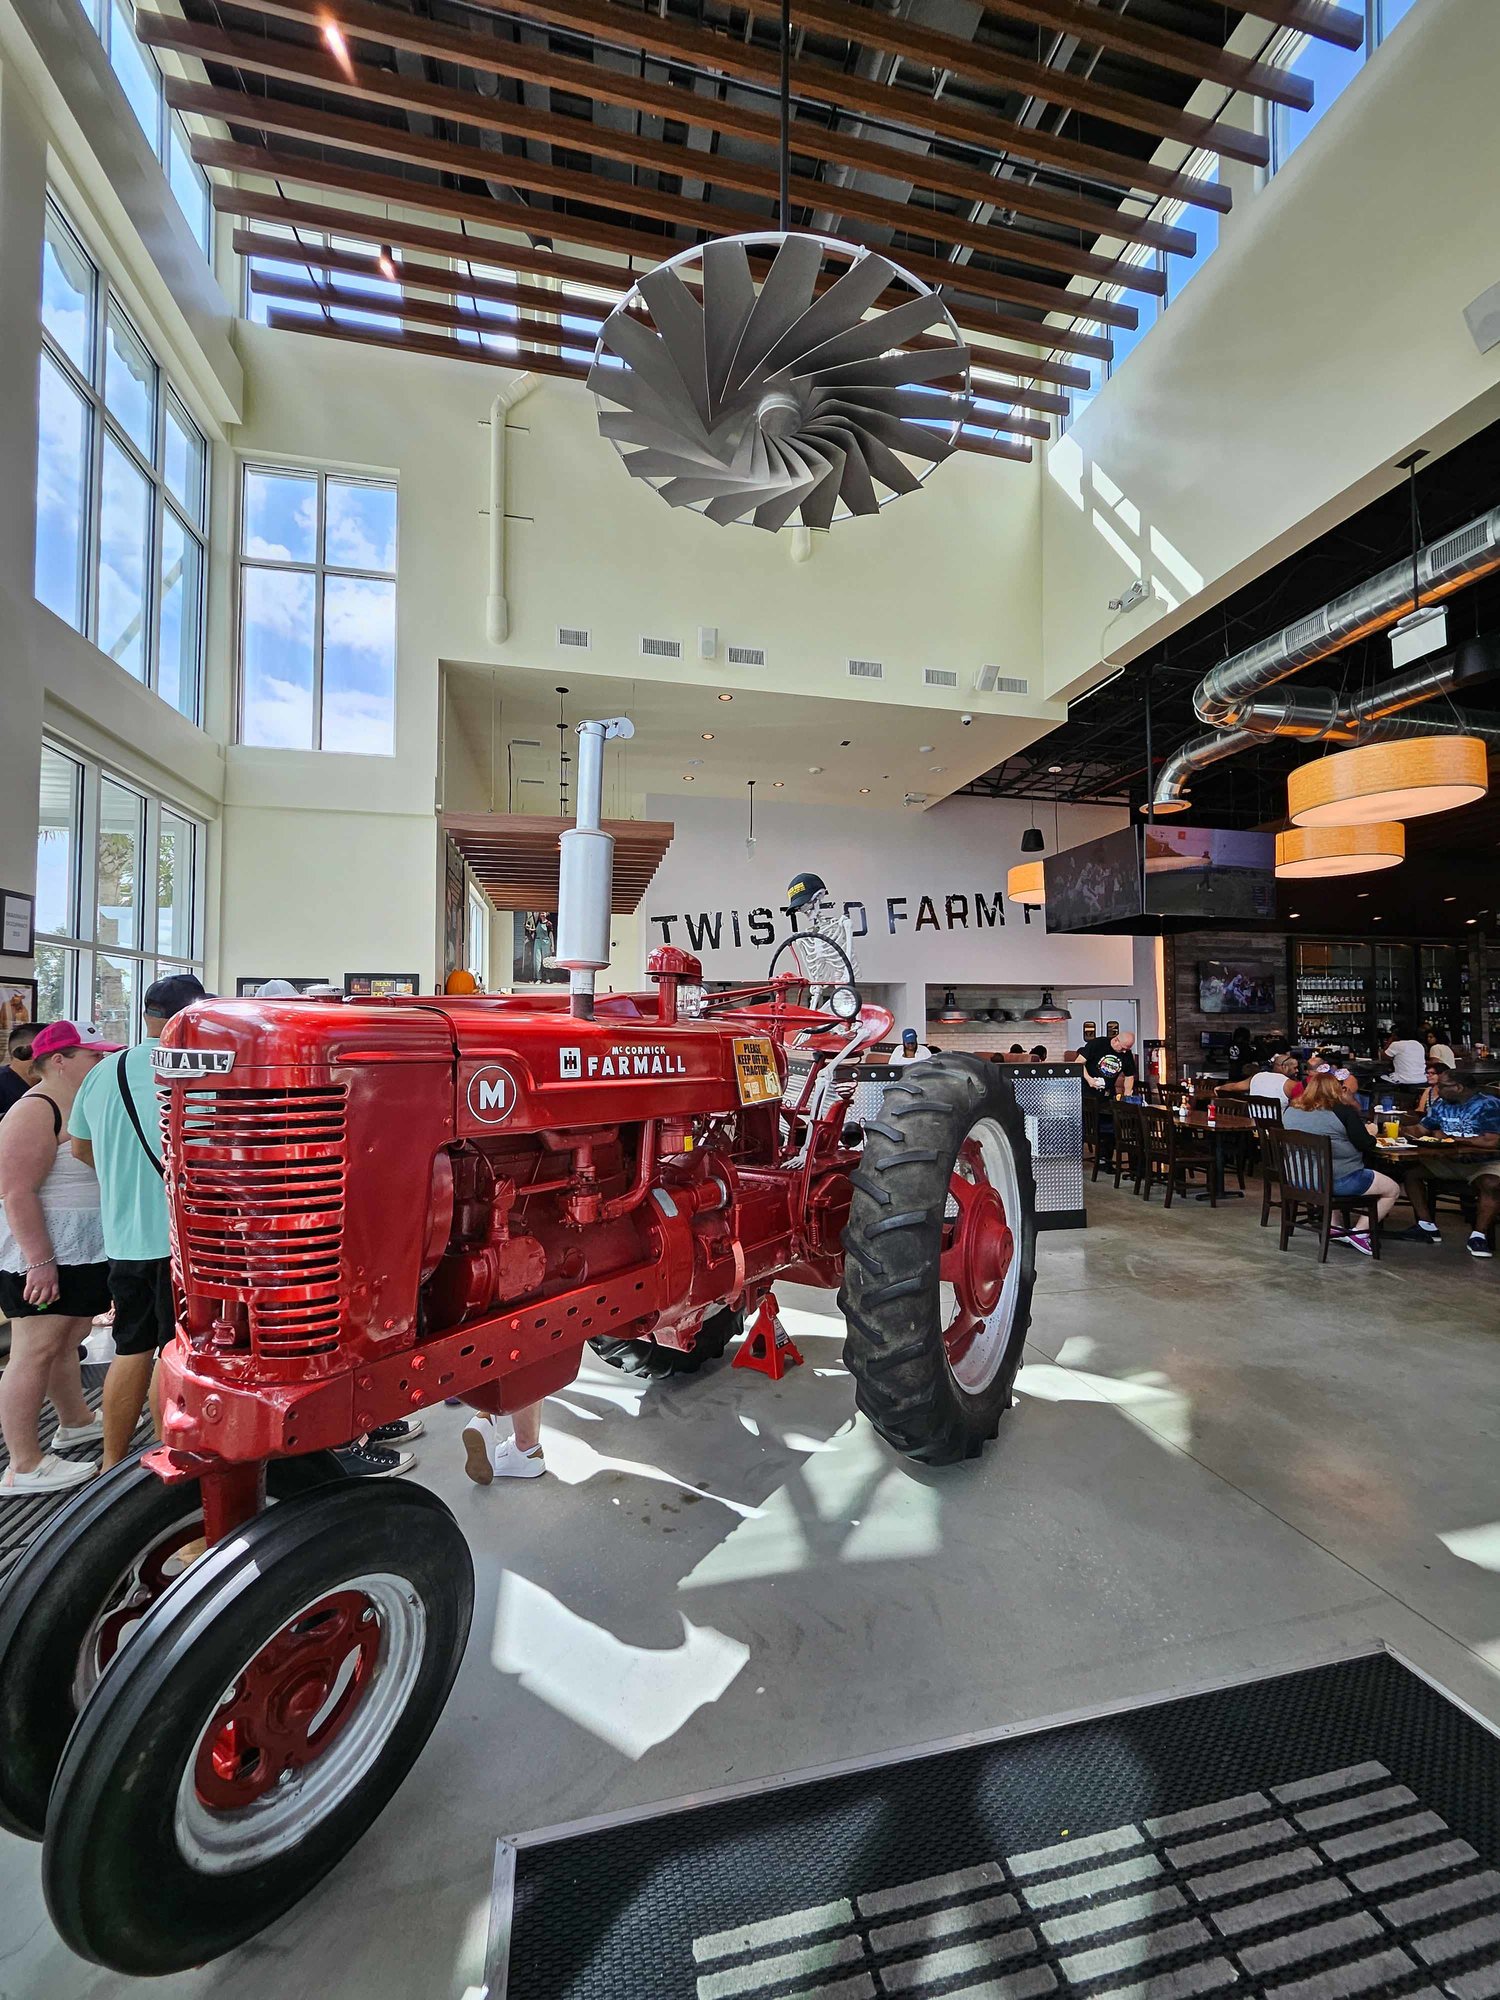 red tractor inside a restaurant waiting area with rustic decor